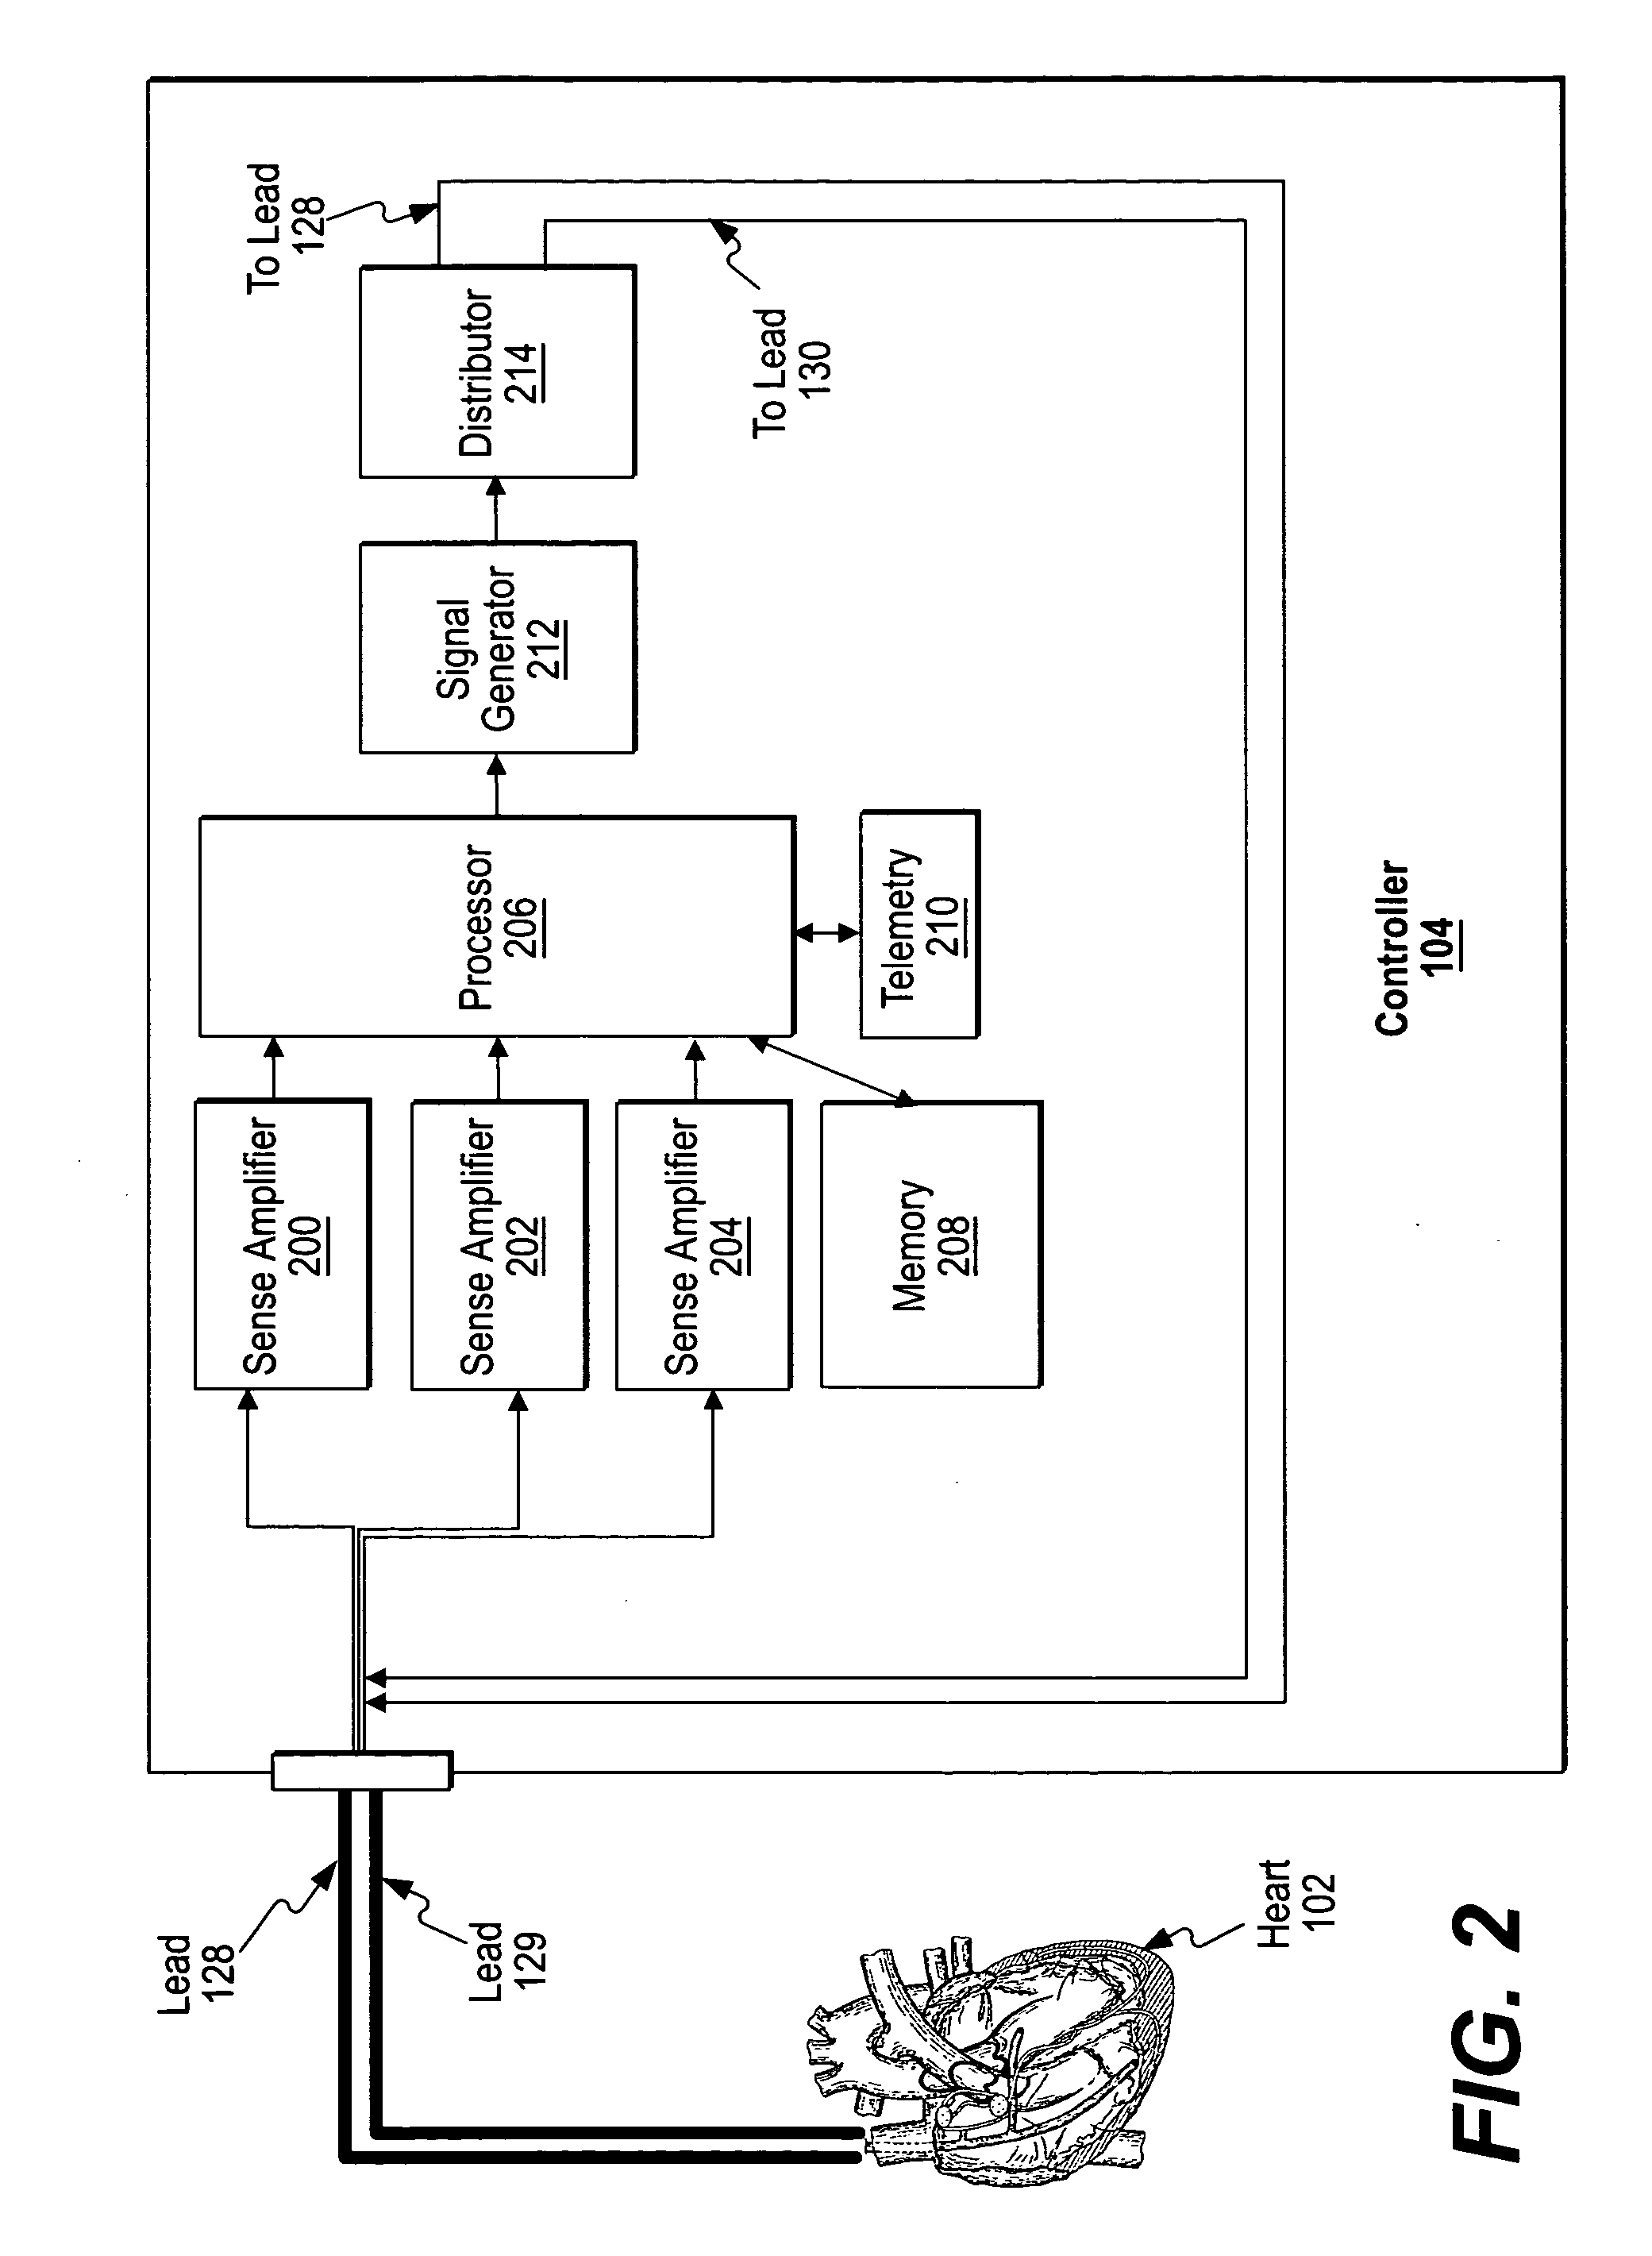 Methods, apparatus, and systems for multiple stimulation from a single stimulator